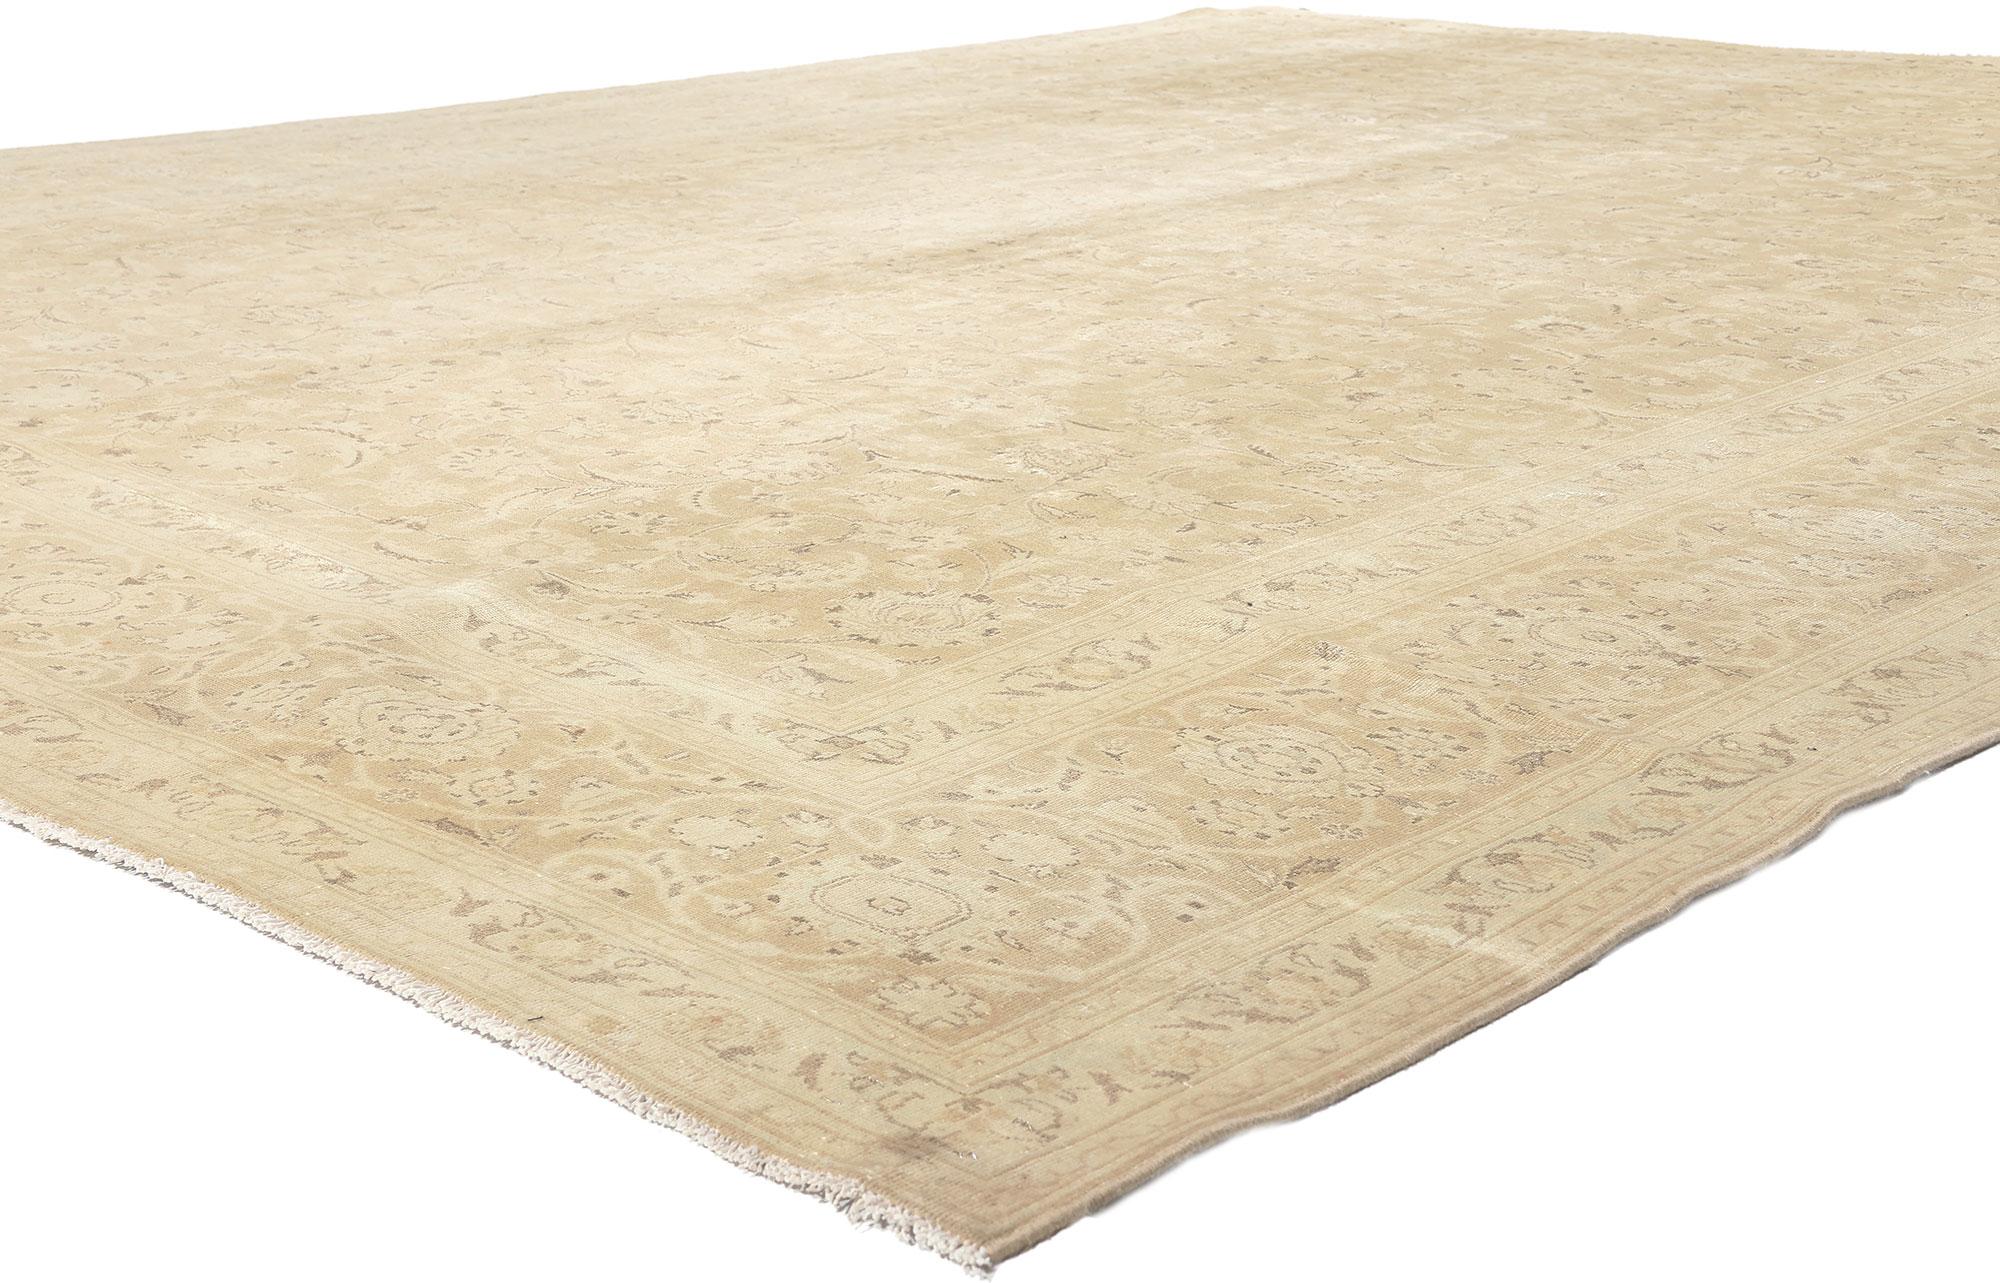 60688 Vintage Persian Tabriz Rug, 09’11 x 12’10. 
Antebellum Southern charm meets the English countryside in this hand knotted wool vintage Persian Tabriz rug. The intricate Herati design and neutral color palette in this piece work together evoke a